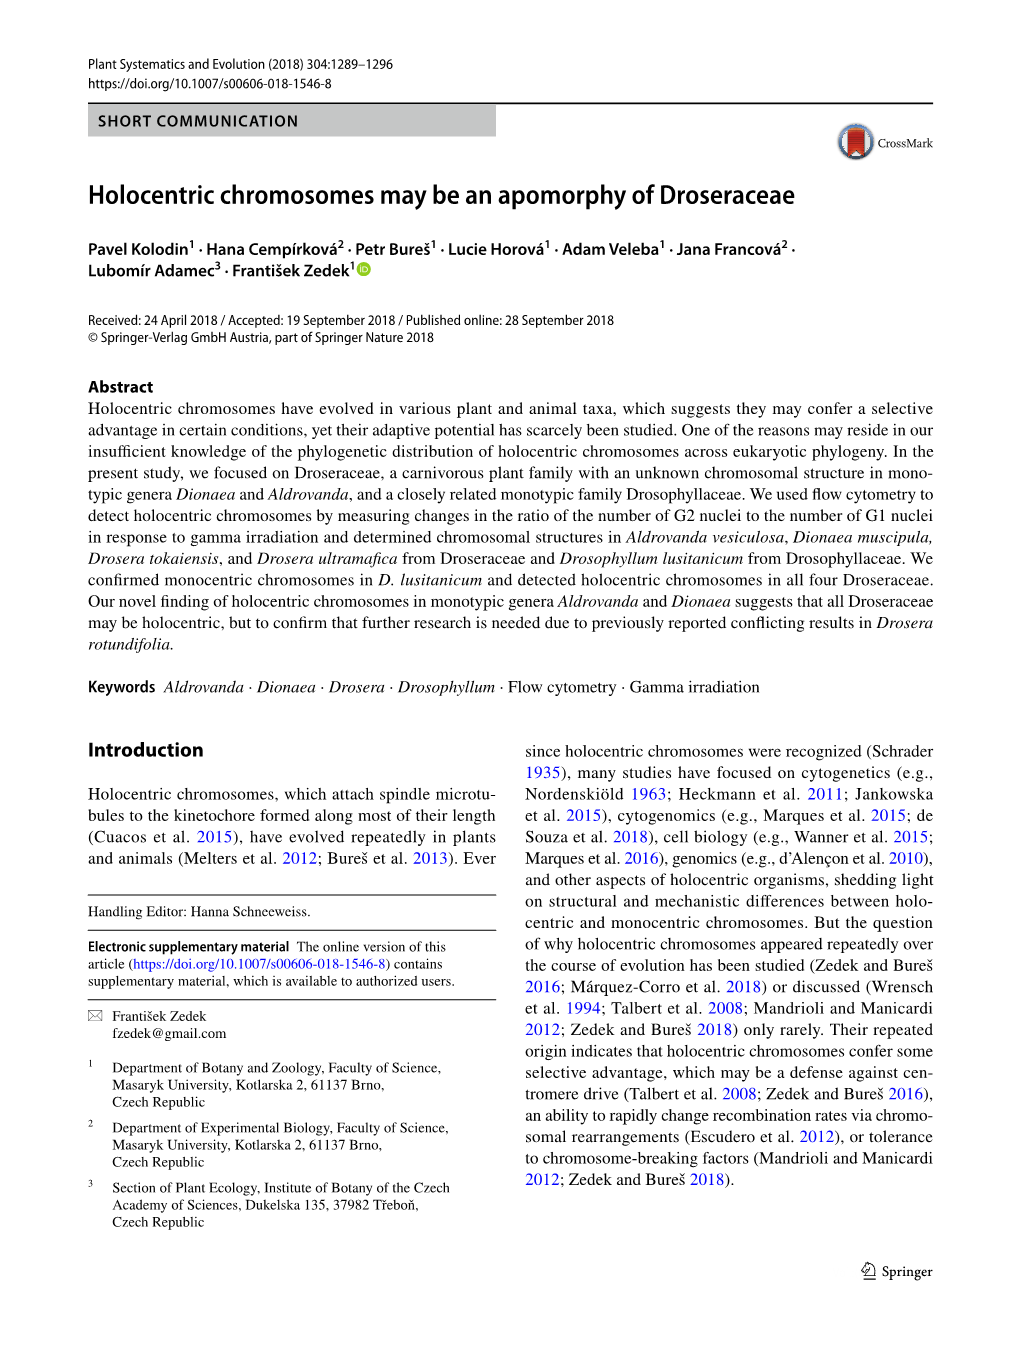 Holocentric Chromosomes May Be an Apomorphy of Droseraceae